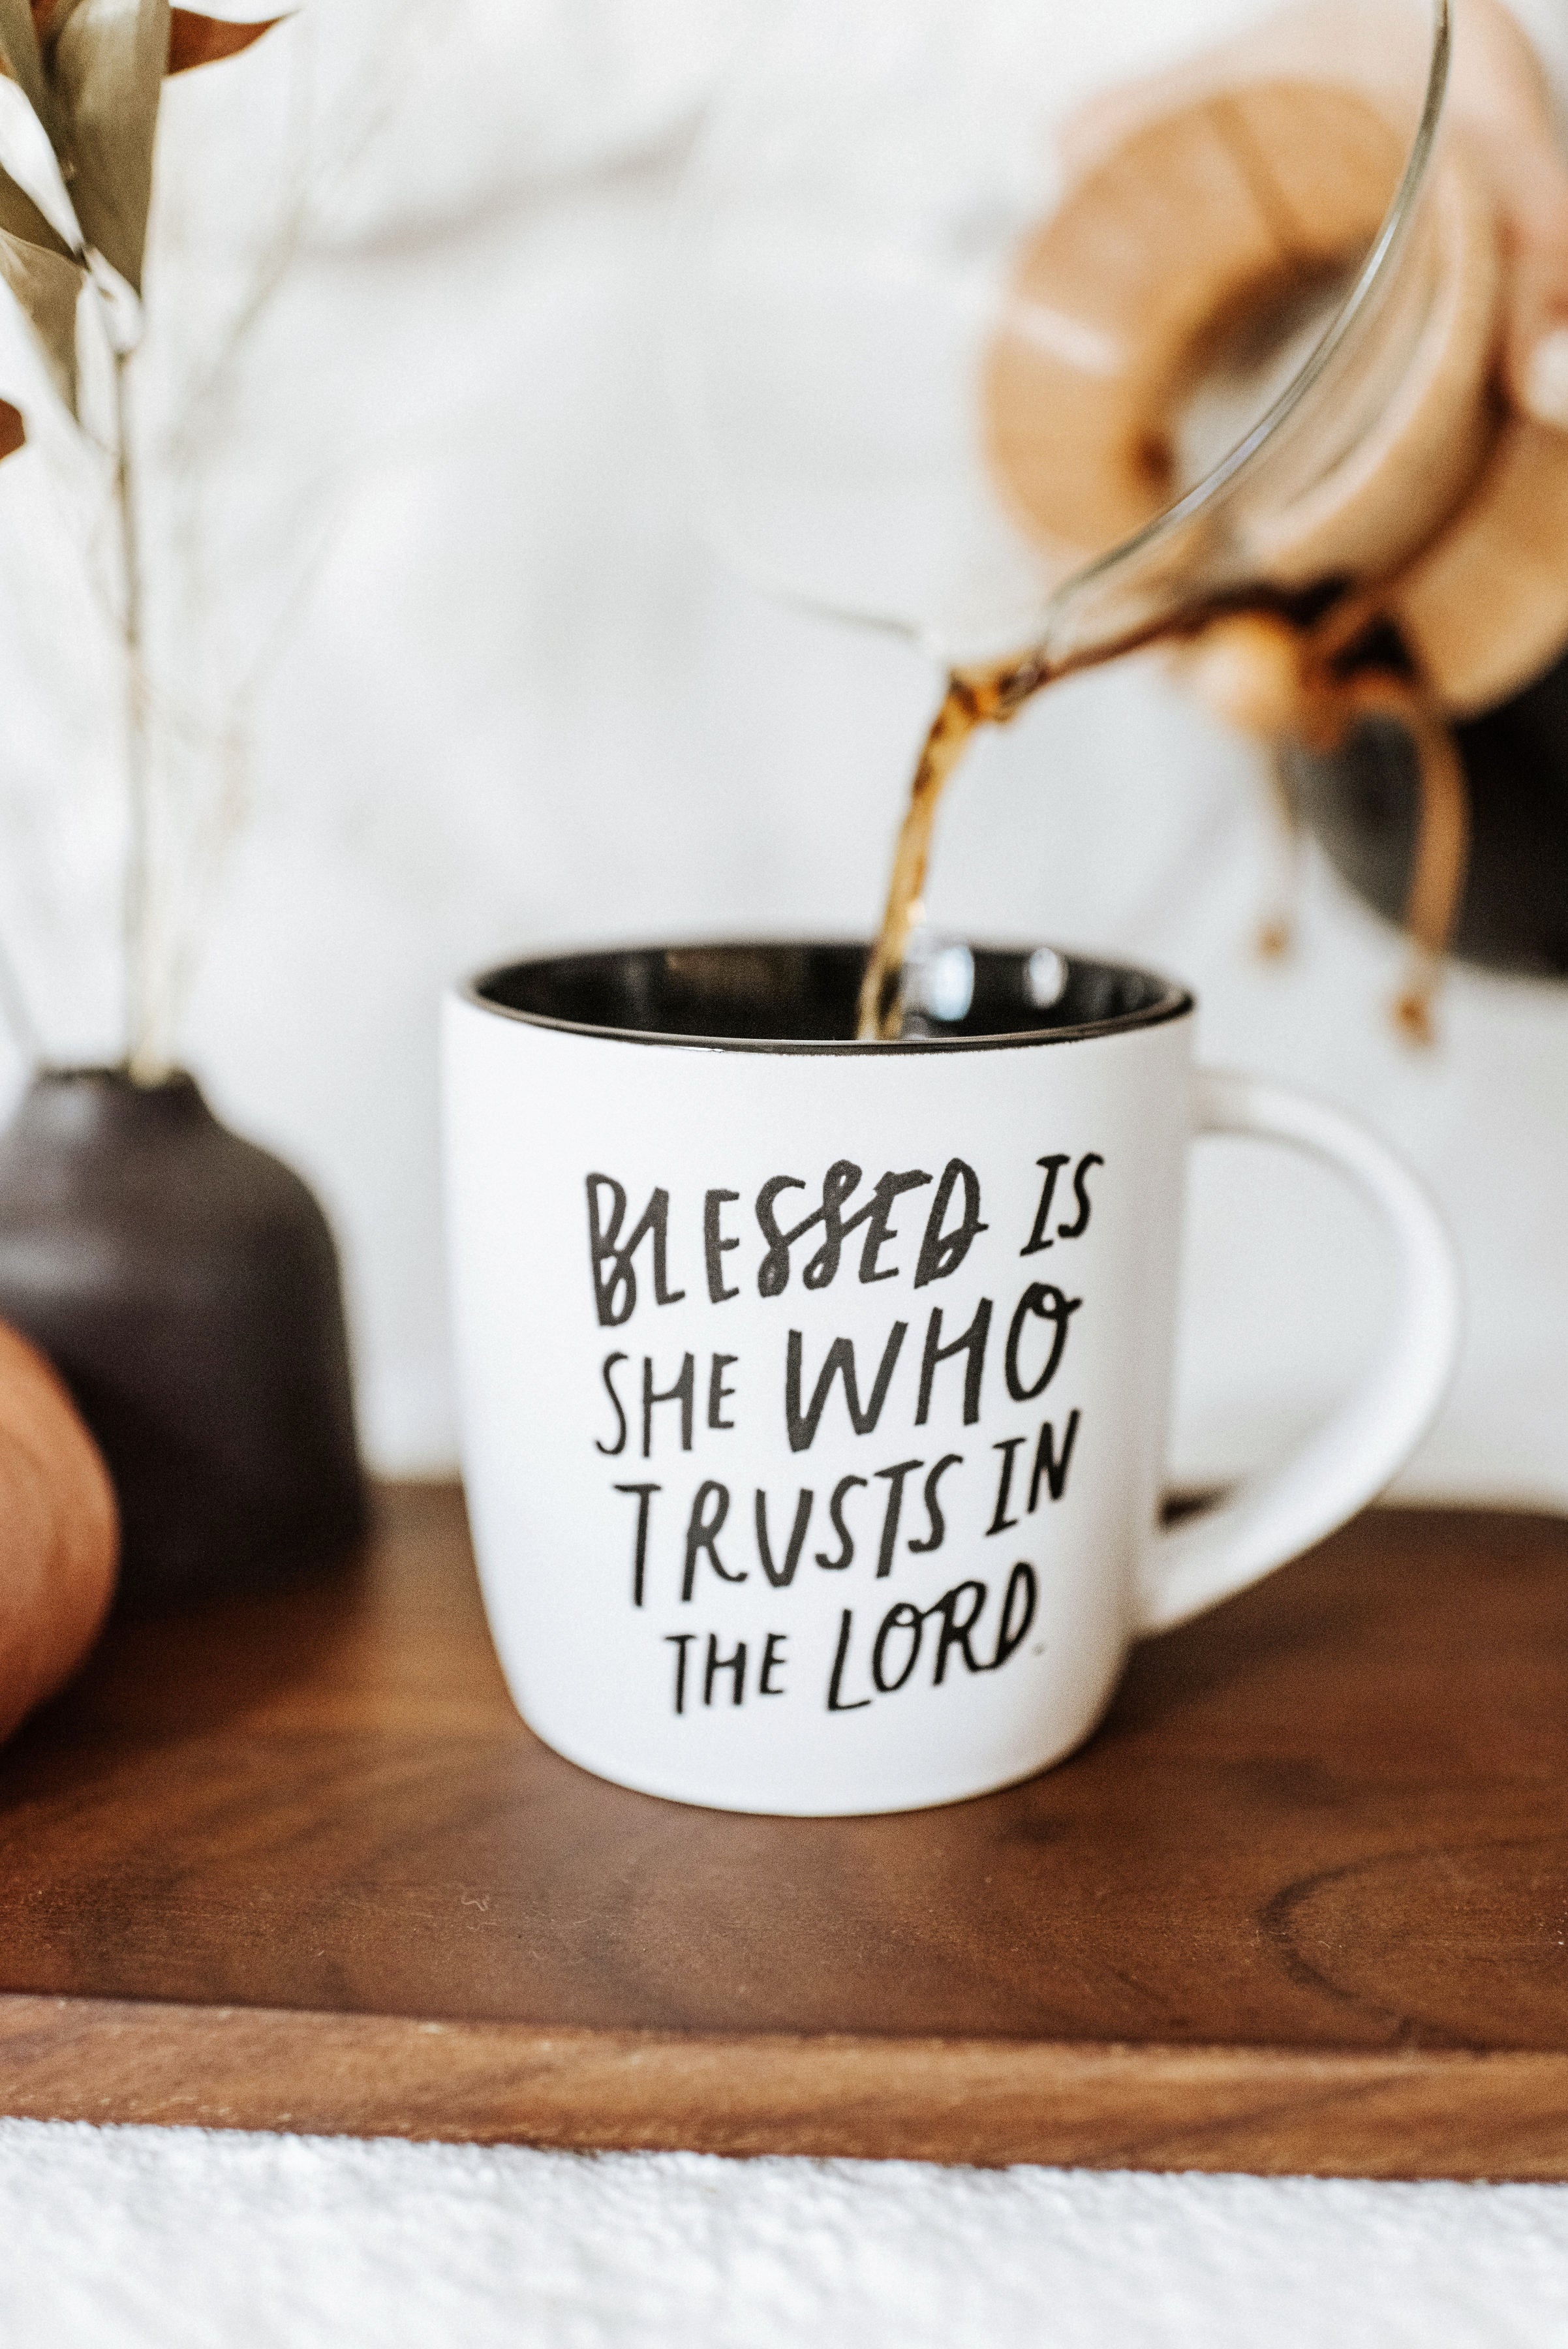 Blessed is she who trusts in the Lord mug